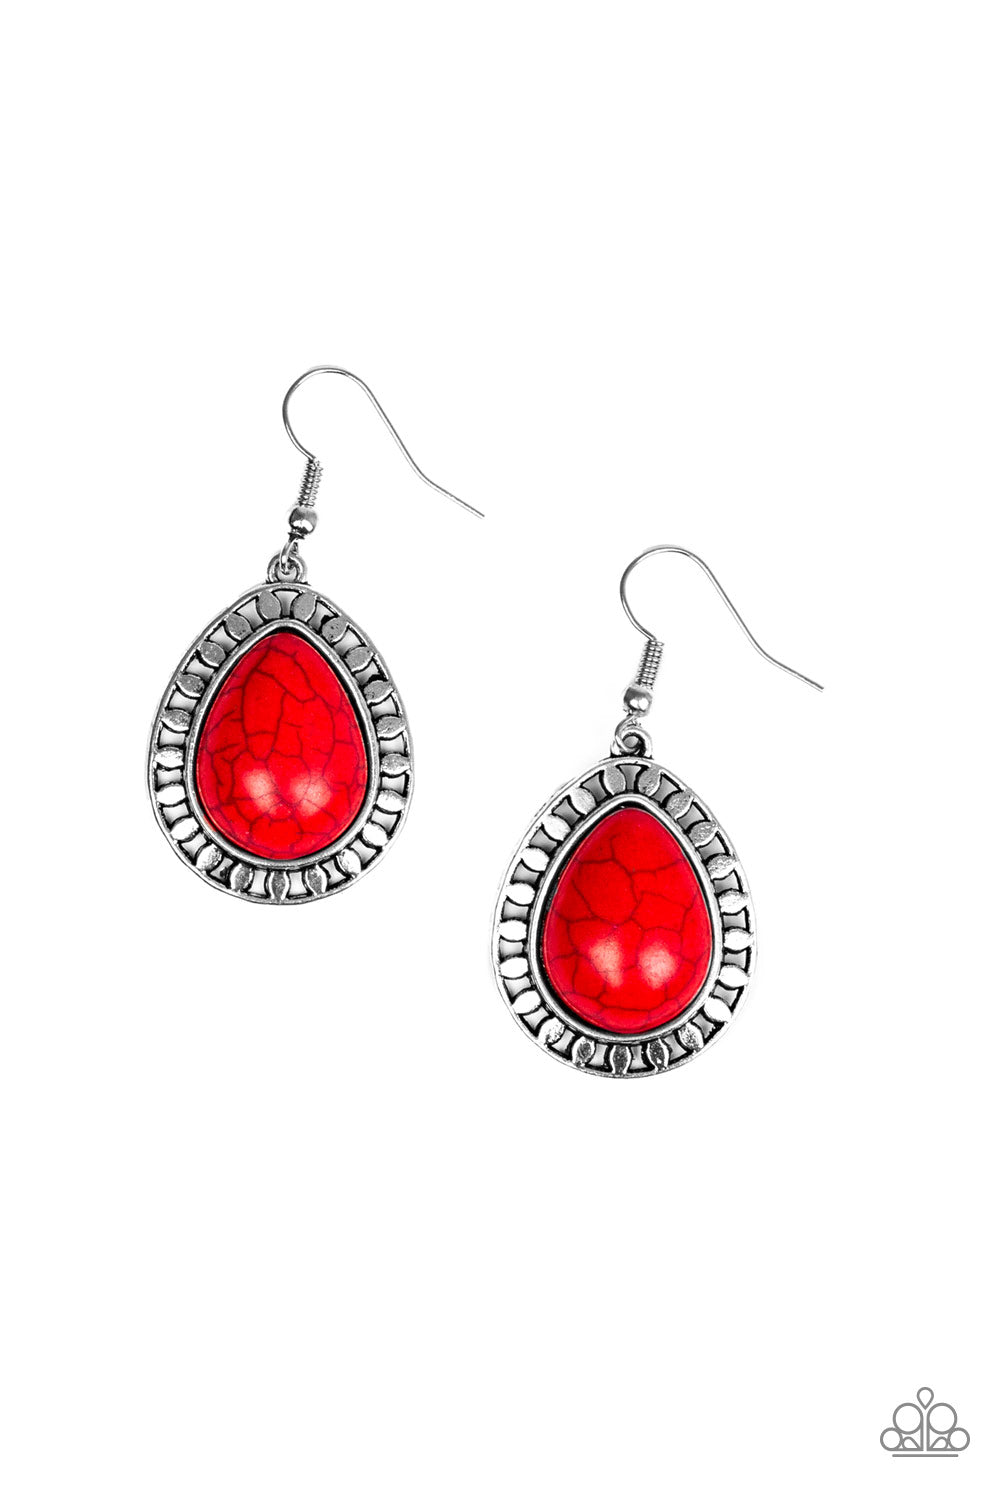 Paparazzi Accessories Sahara Serenity - Red Earrings - Be Adored Jewelry